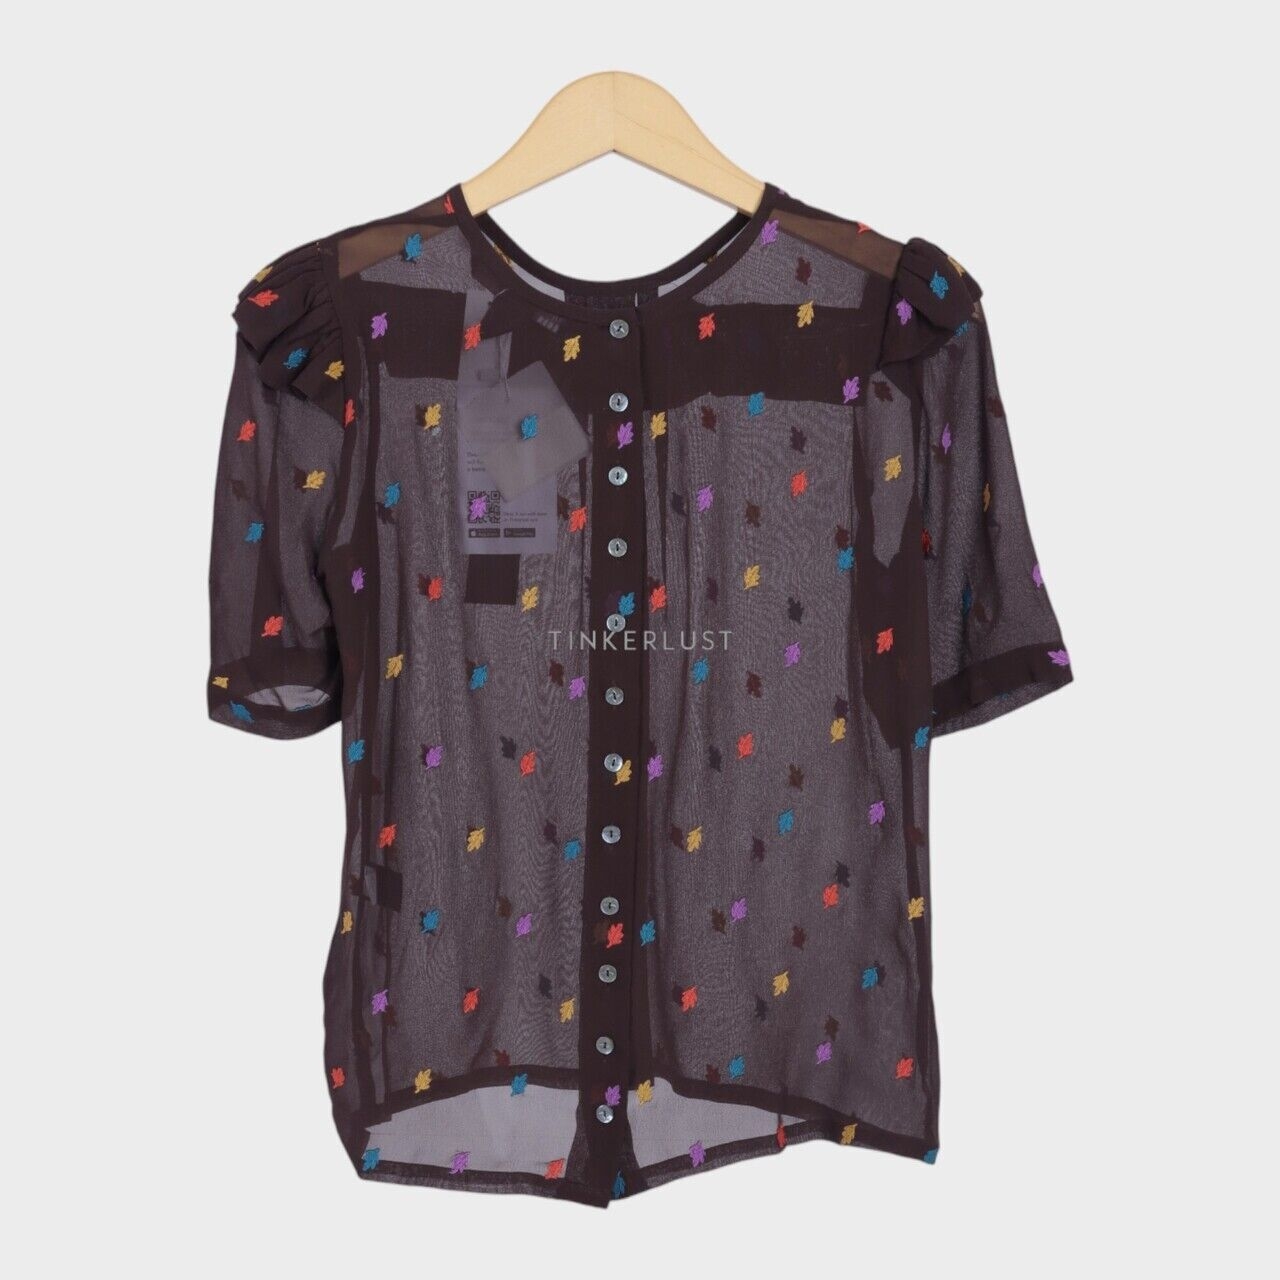 Marc by Marc Jacobs Brown Sheer Blouse